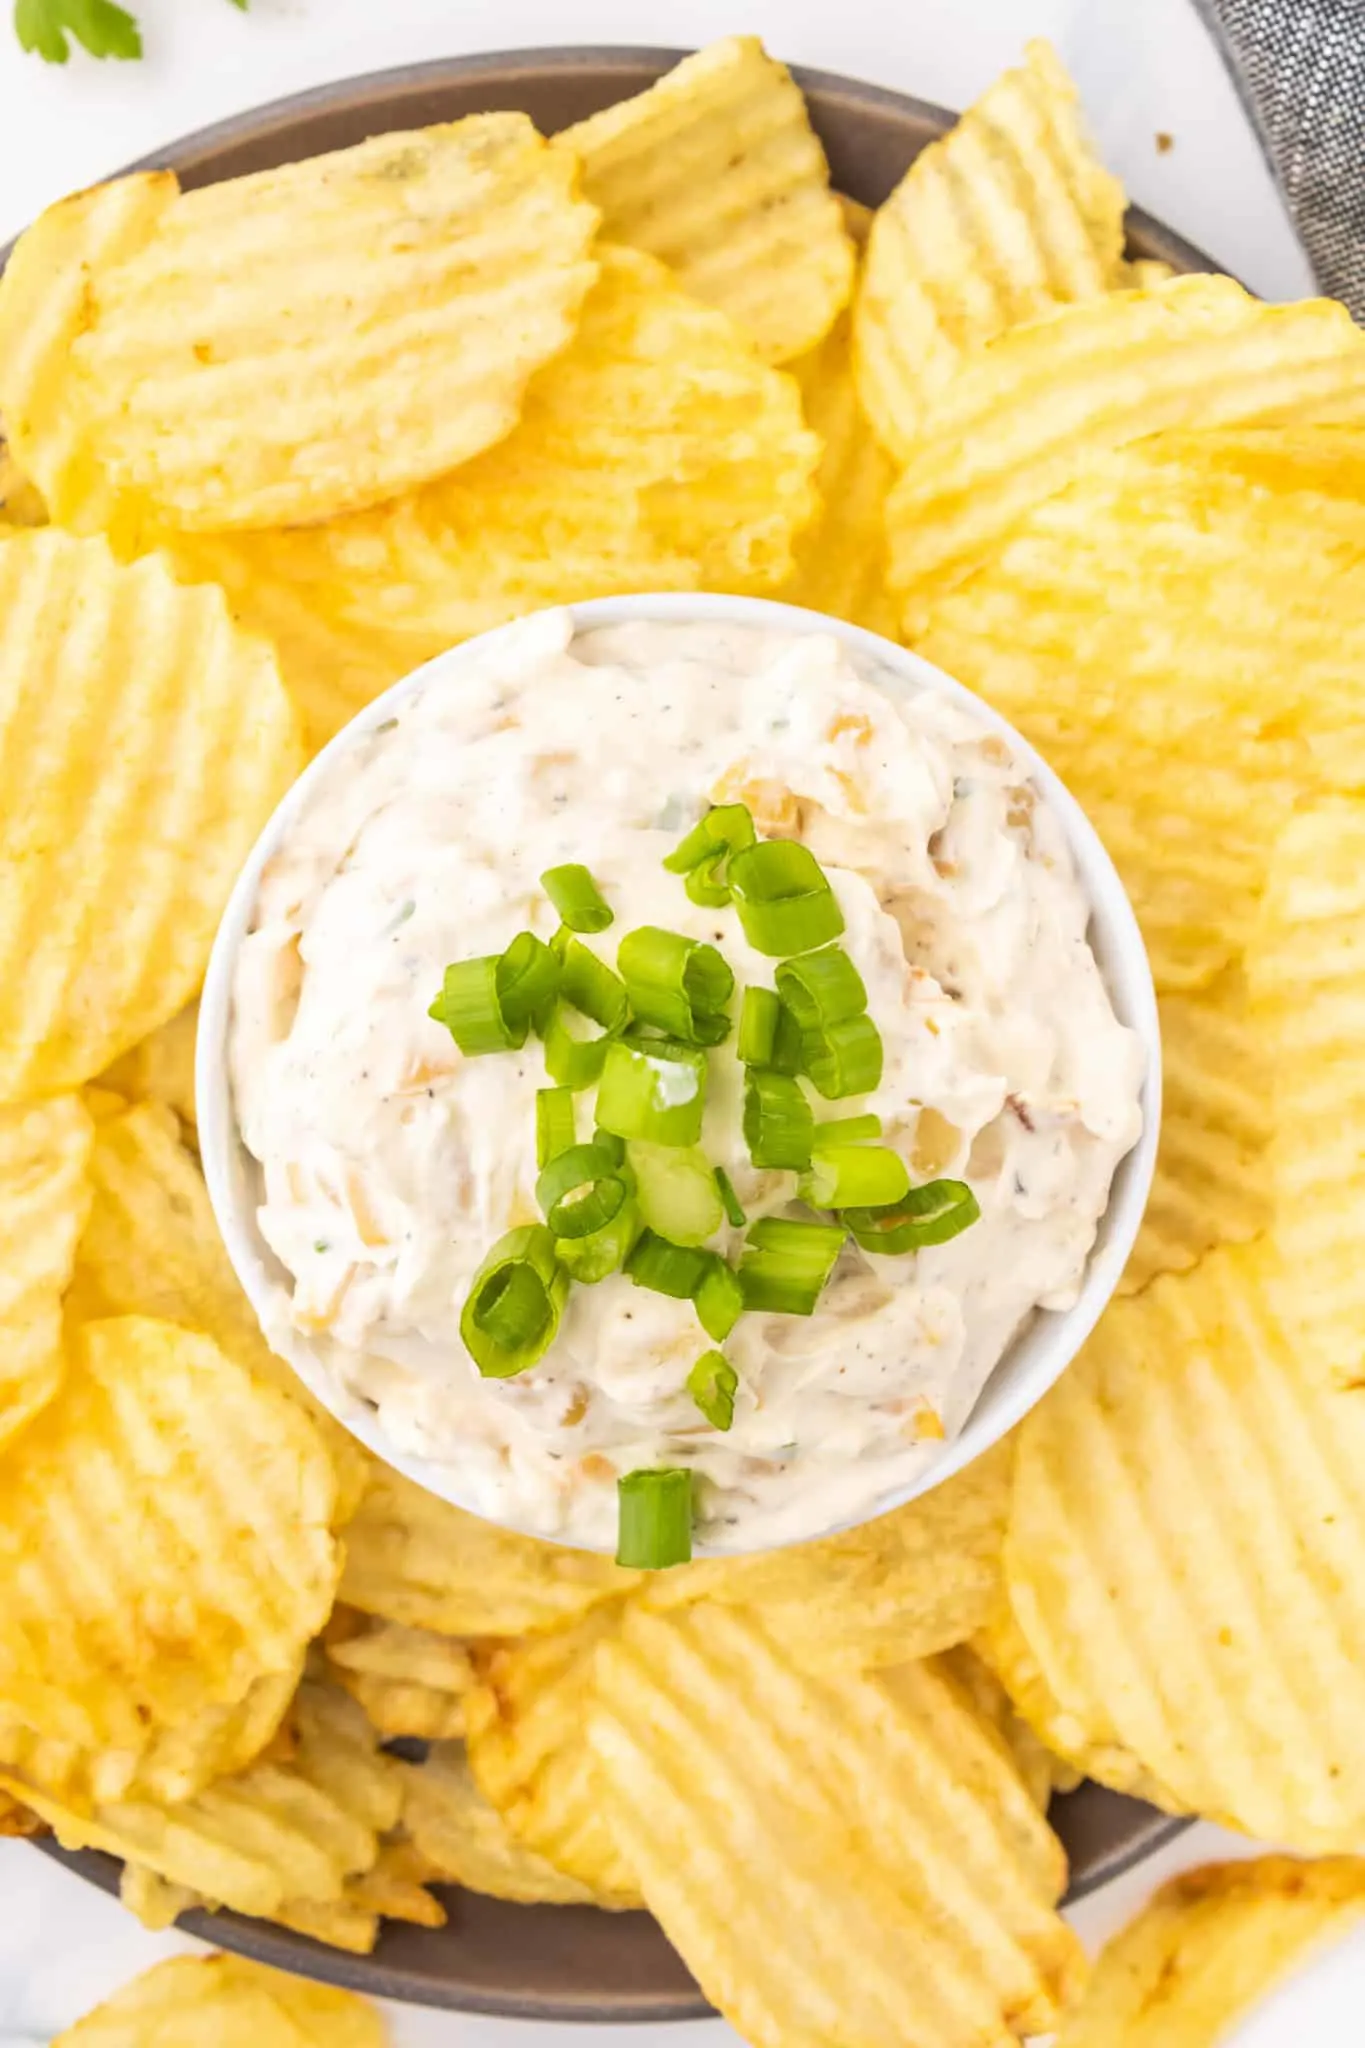 French Onion Dip is a creamy mayo and sour cream based dip loaded with caramelized onions and seasoned with garlic, salt and pepper.